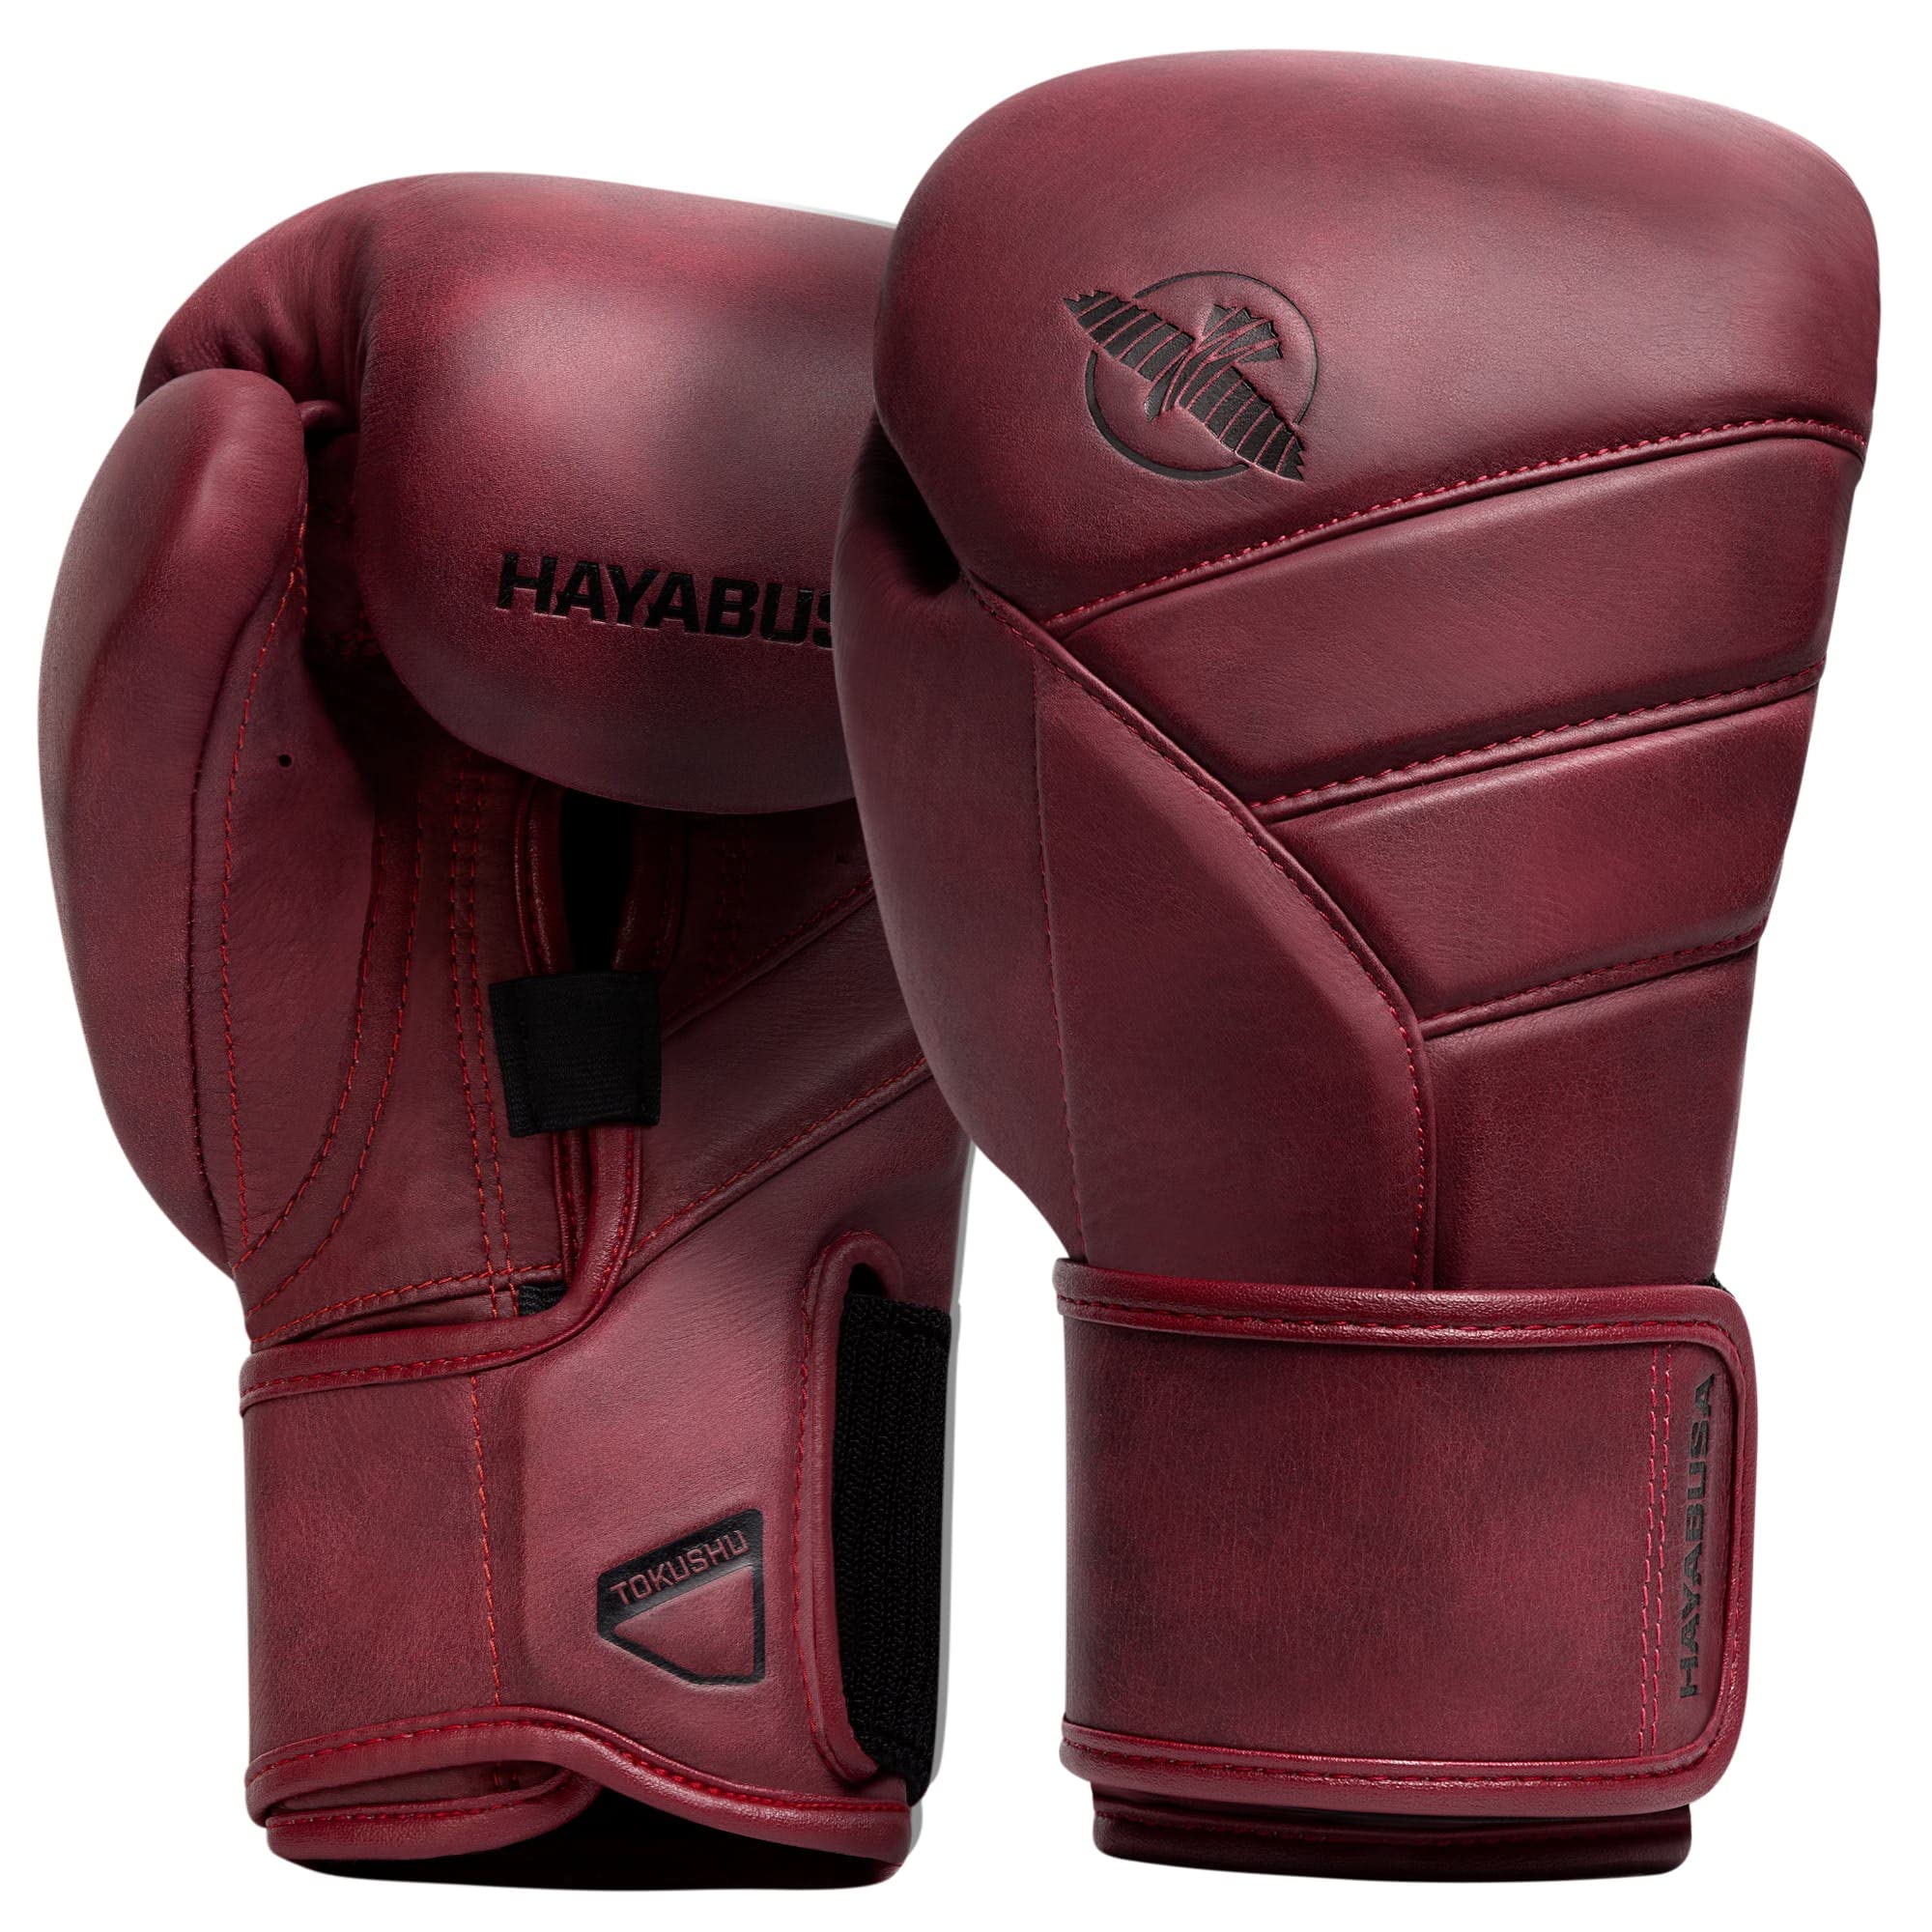 Hayabusa T3 LX Leather Boxing gloves Men and Women for Training Sparring Heavy Bag and Mitt Work - crimson, 12 oz